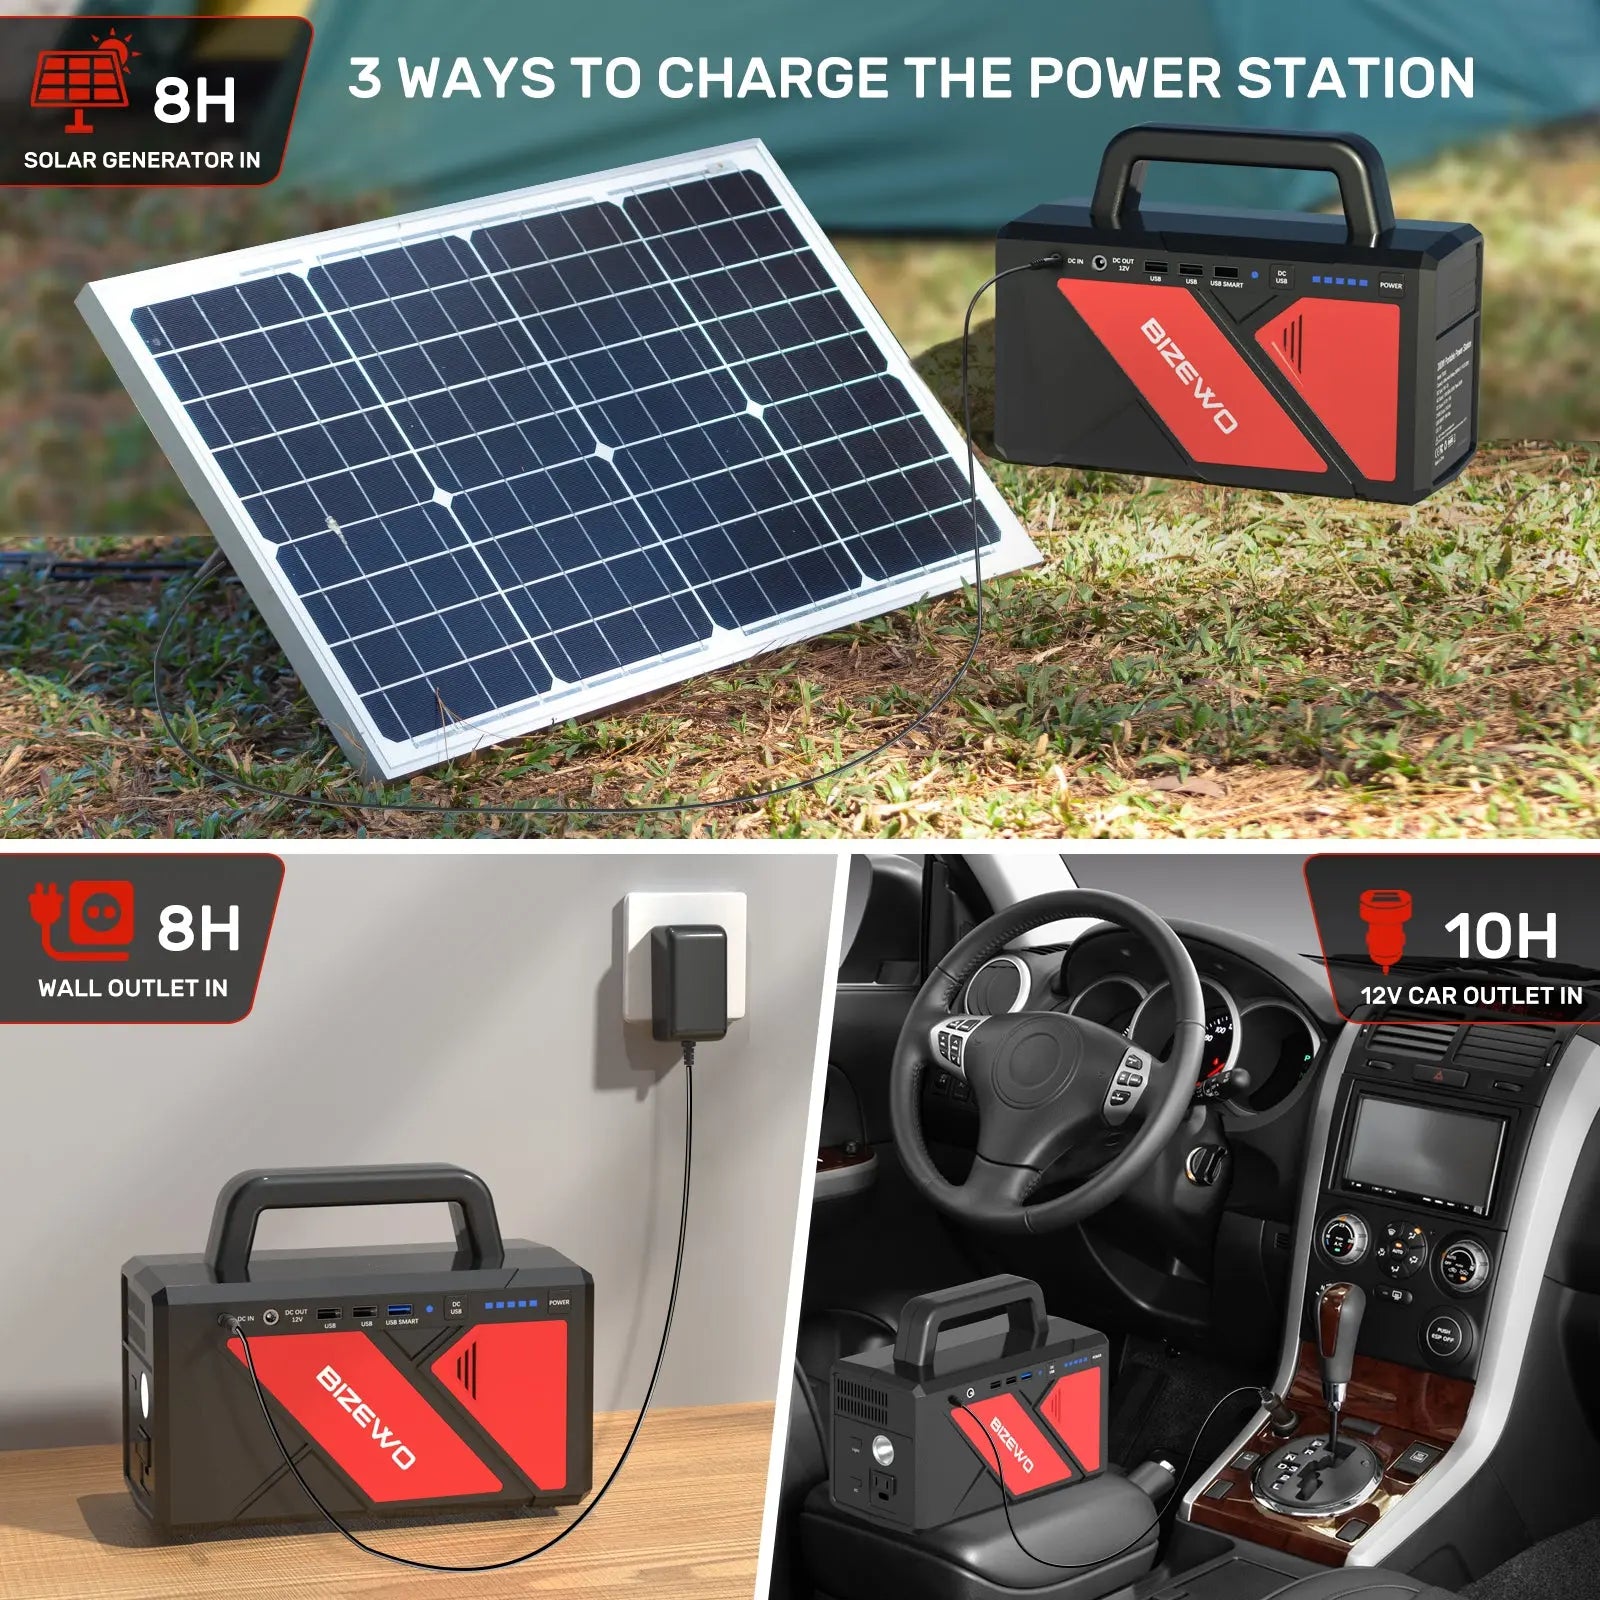 Portable Power Station, Outdoor Generator 67560mAh Native 250Wh Solar generator, Power Bank for Home, Backup Lithium Battery, BIZEWO Rechargeable Battery Backup Pack BIZEWO